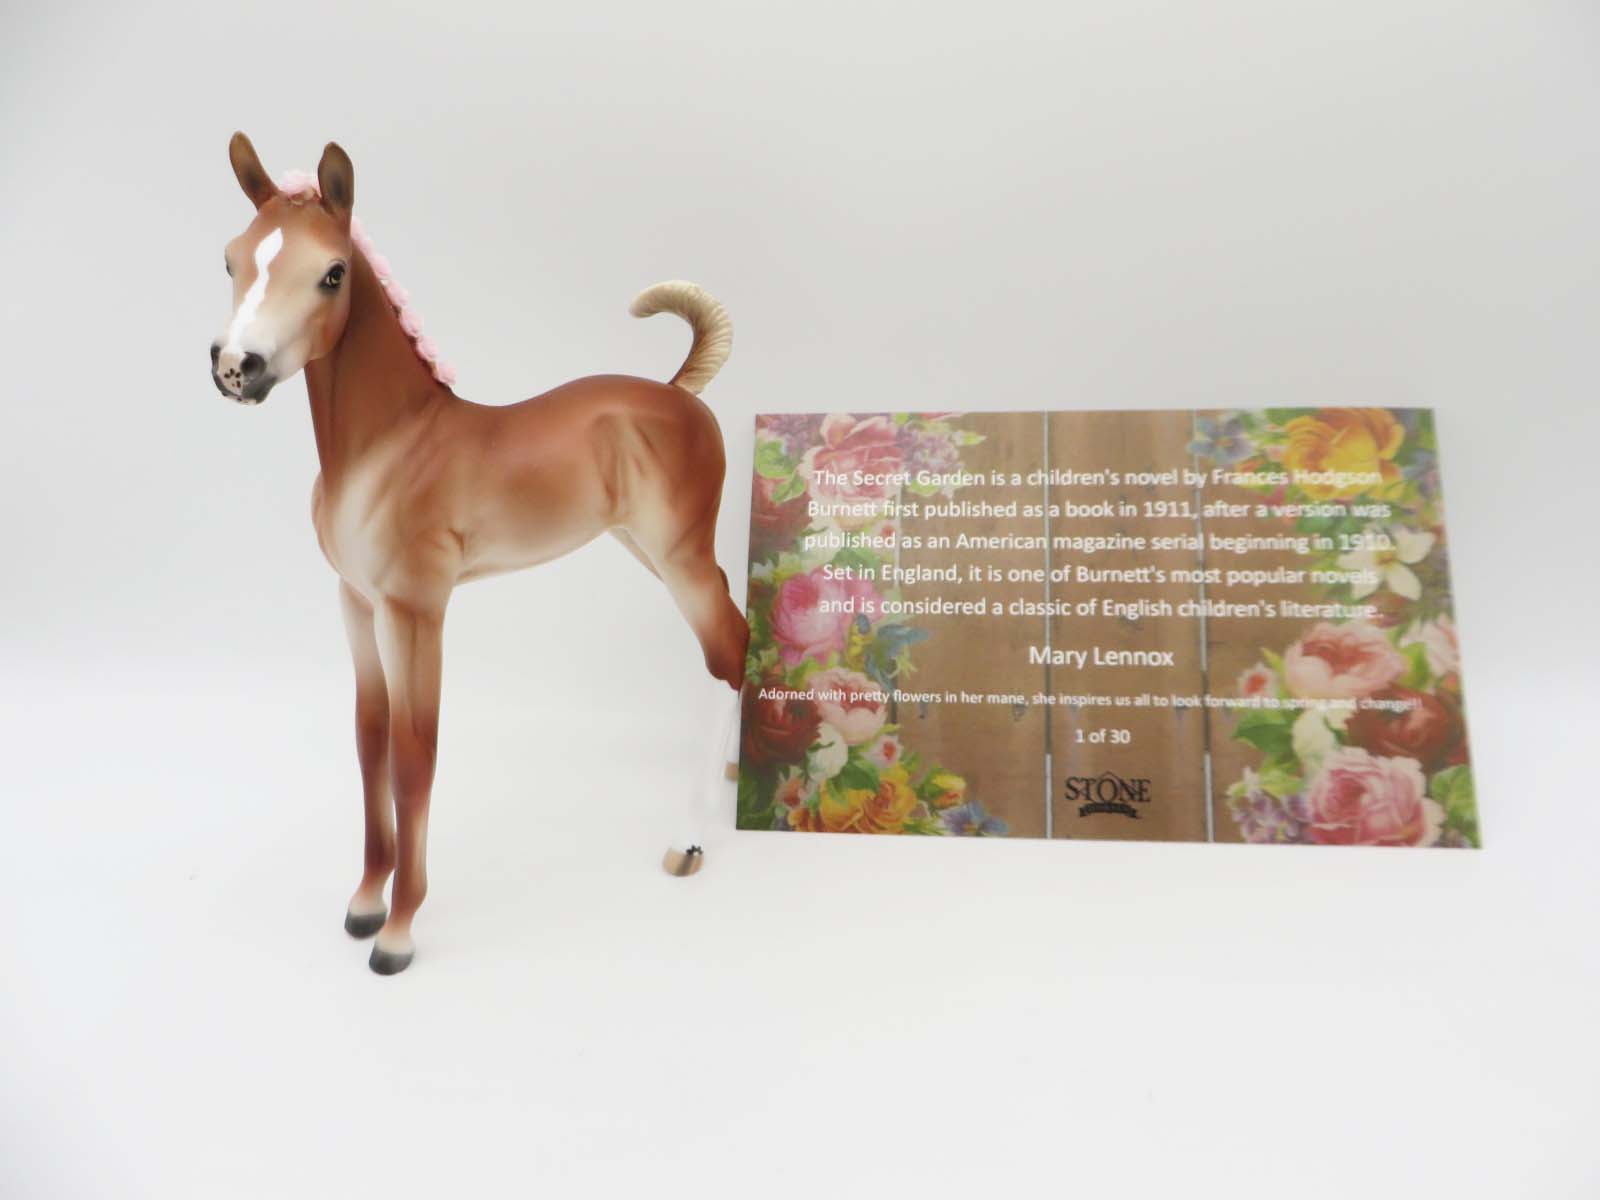 Mary Lennox - Chestnut Arab Foal with Pink Bling Flowers in Her Mane By Ellen Robbins - Classical Literature Series 2023 3/24/23